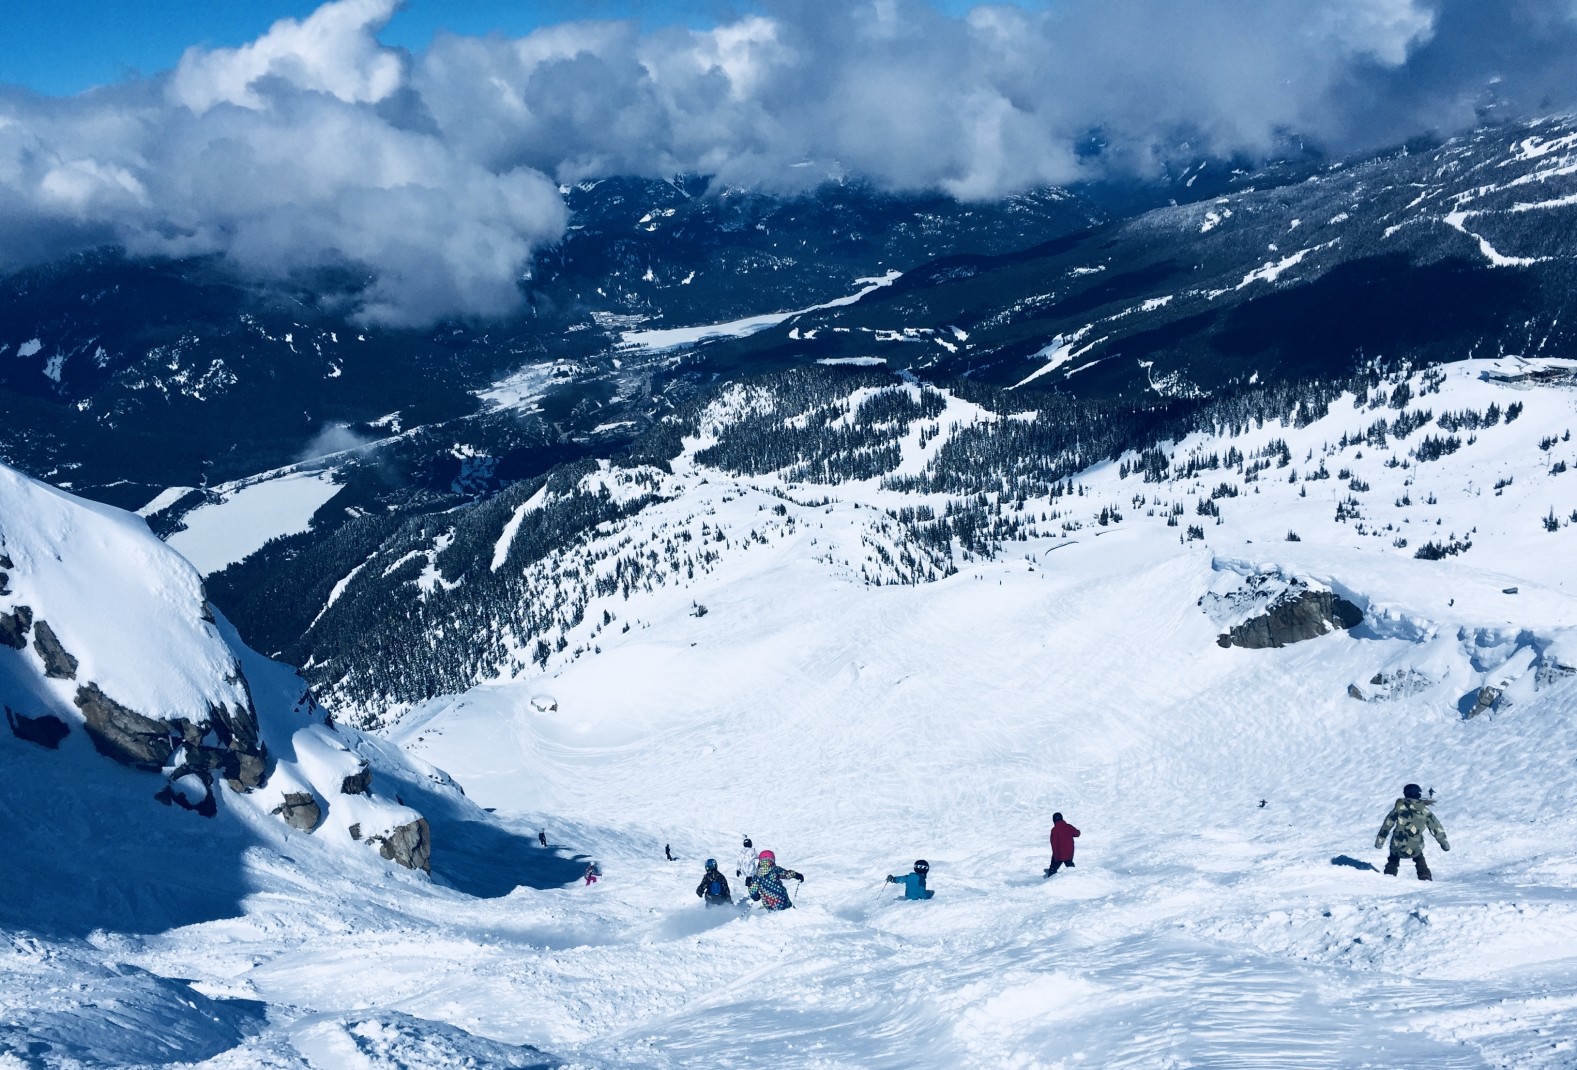 skiers on a snowy mountain during daytime